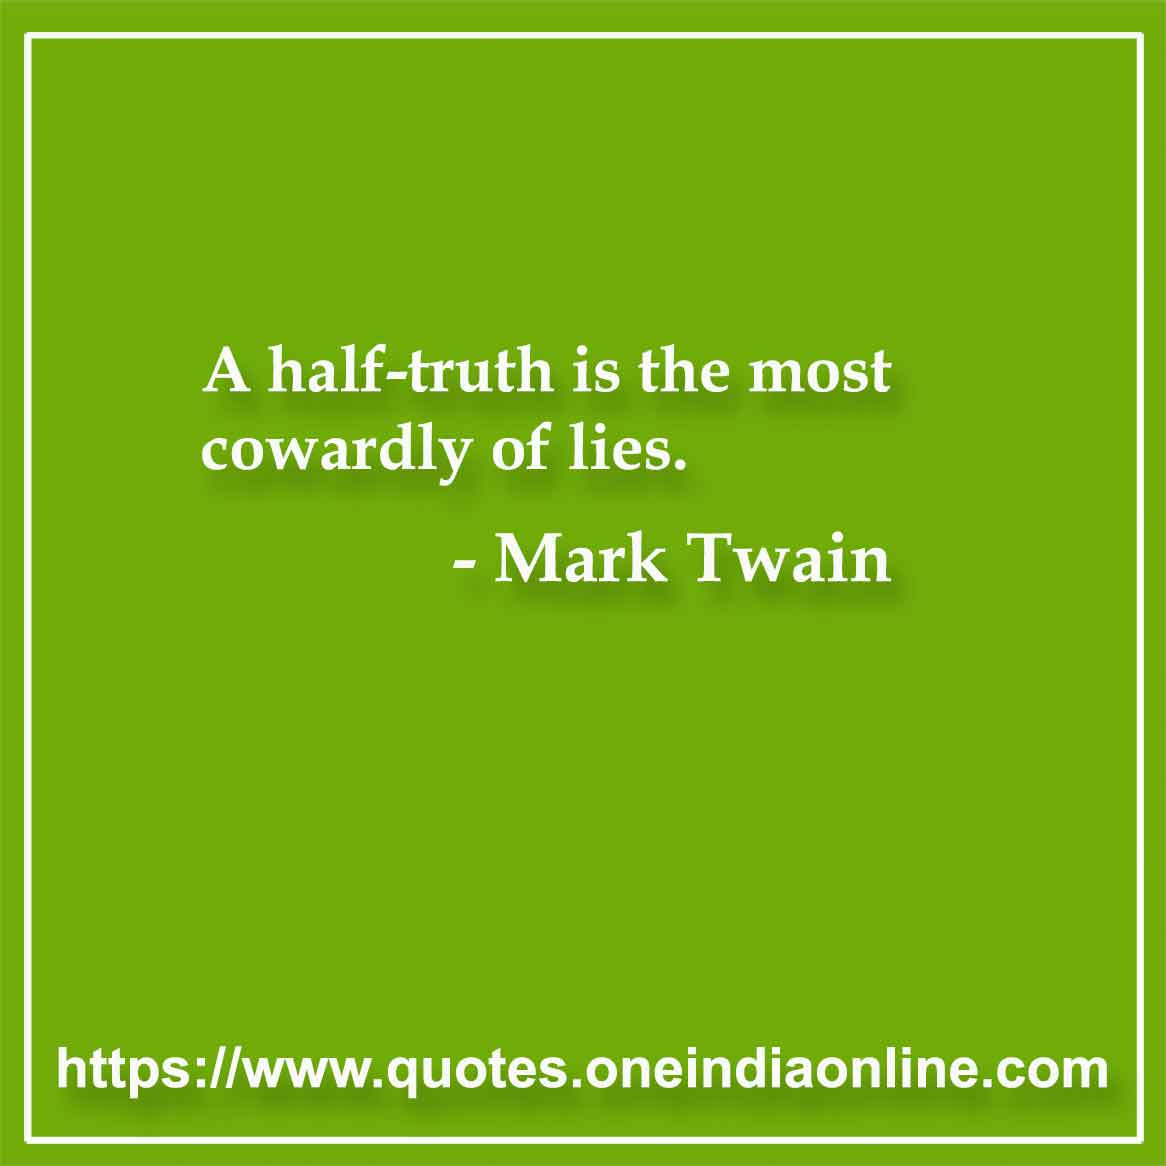 A half-truth is the most cowardly of lies.

- Mark Twain Sayings